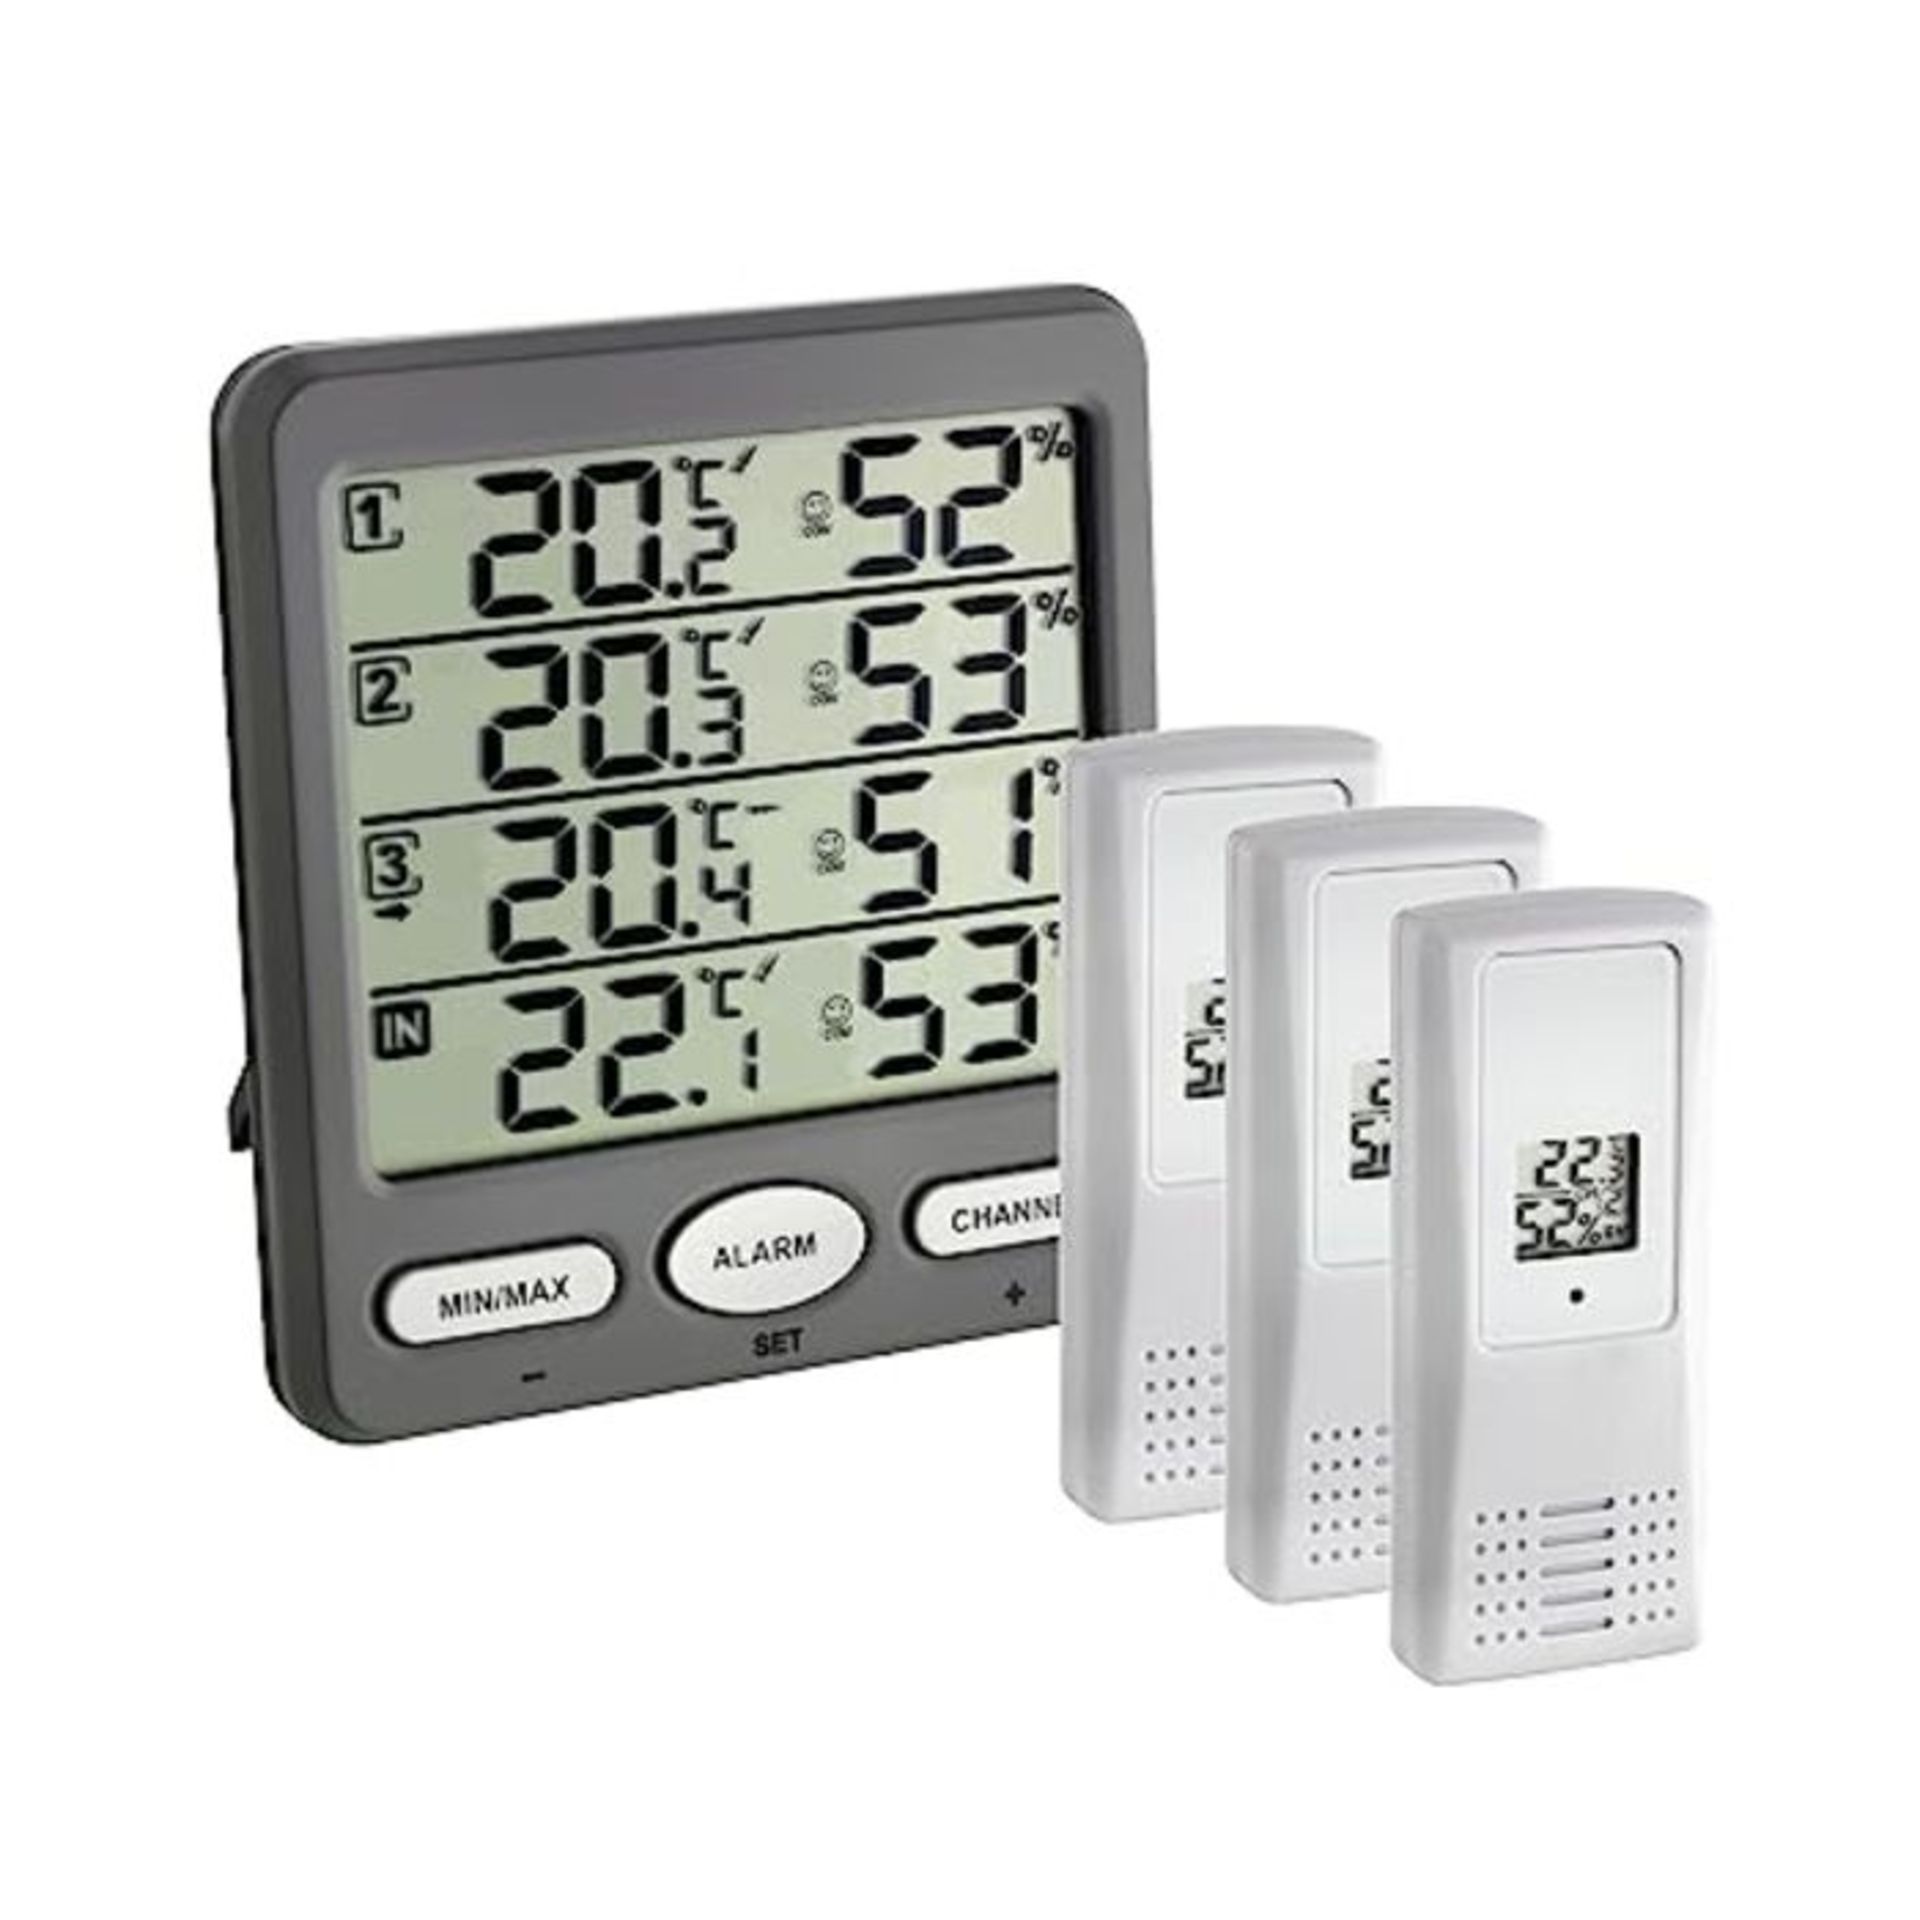 Blooming Weather 30.3054.10 "Klima" Wireless Thermo-Hygrometer - Black